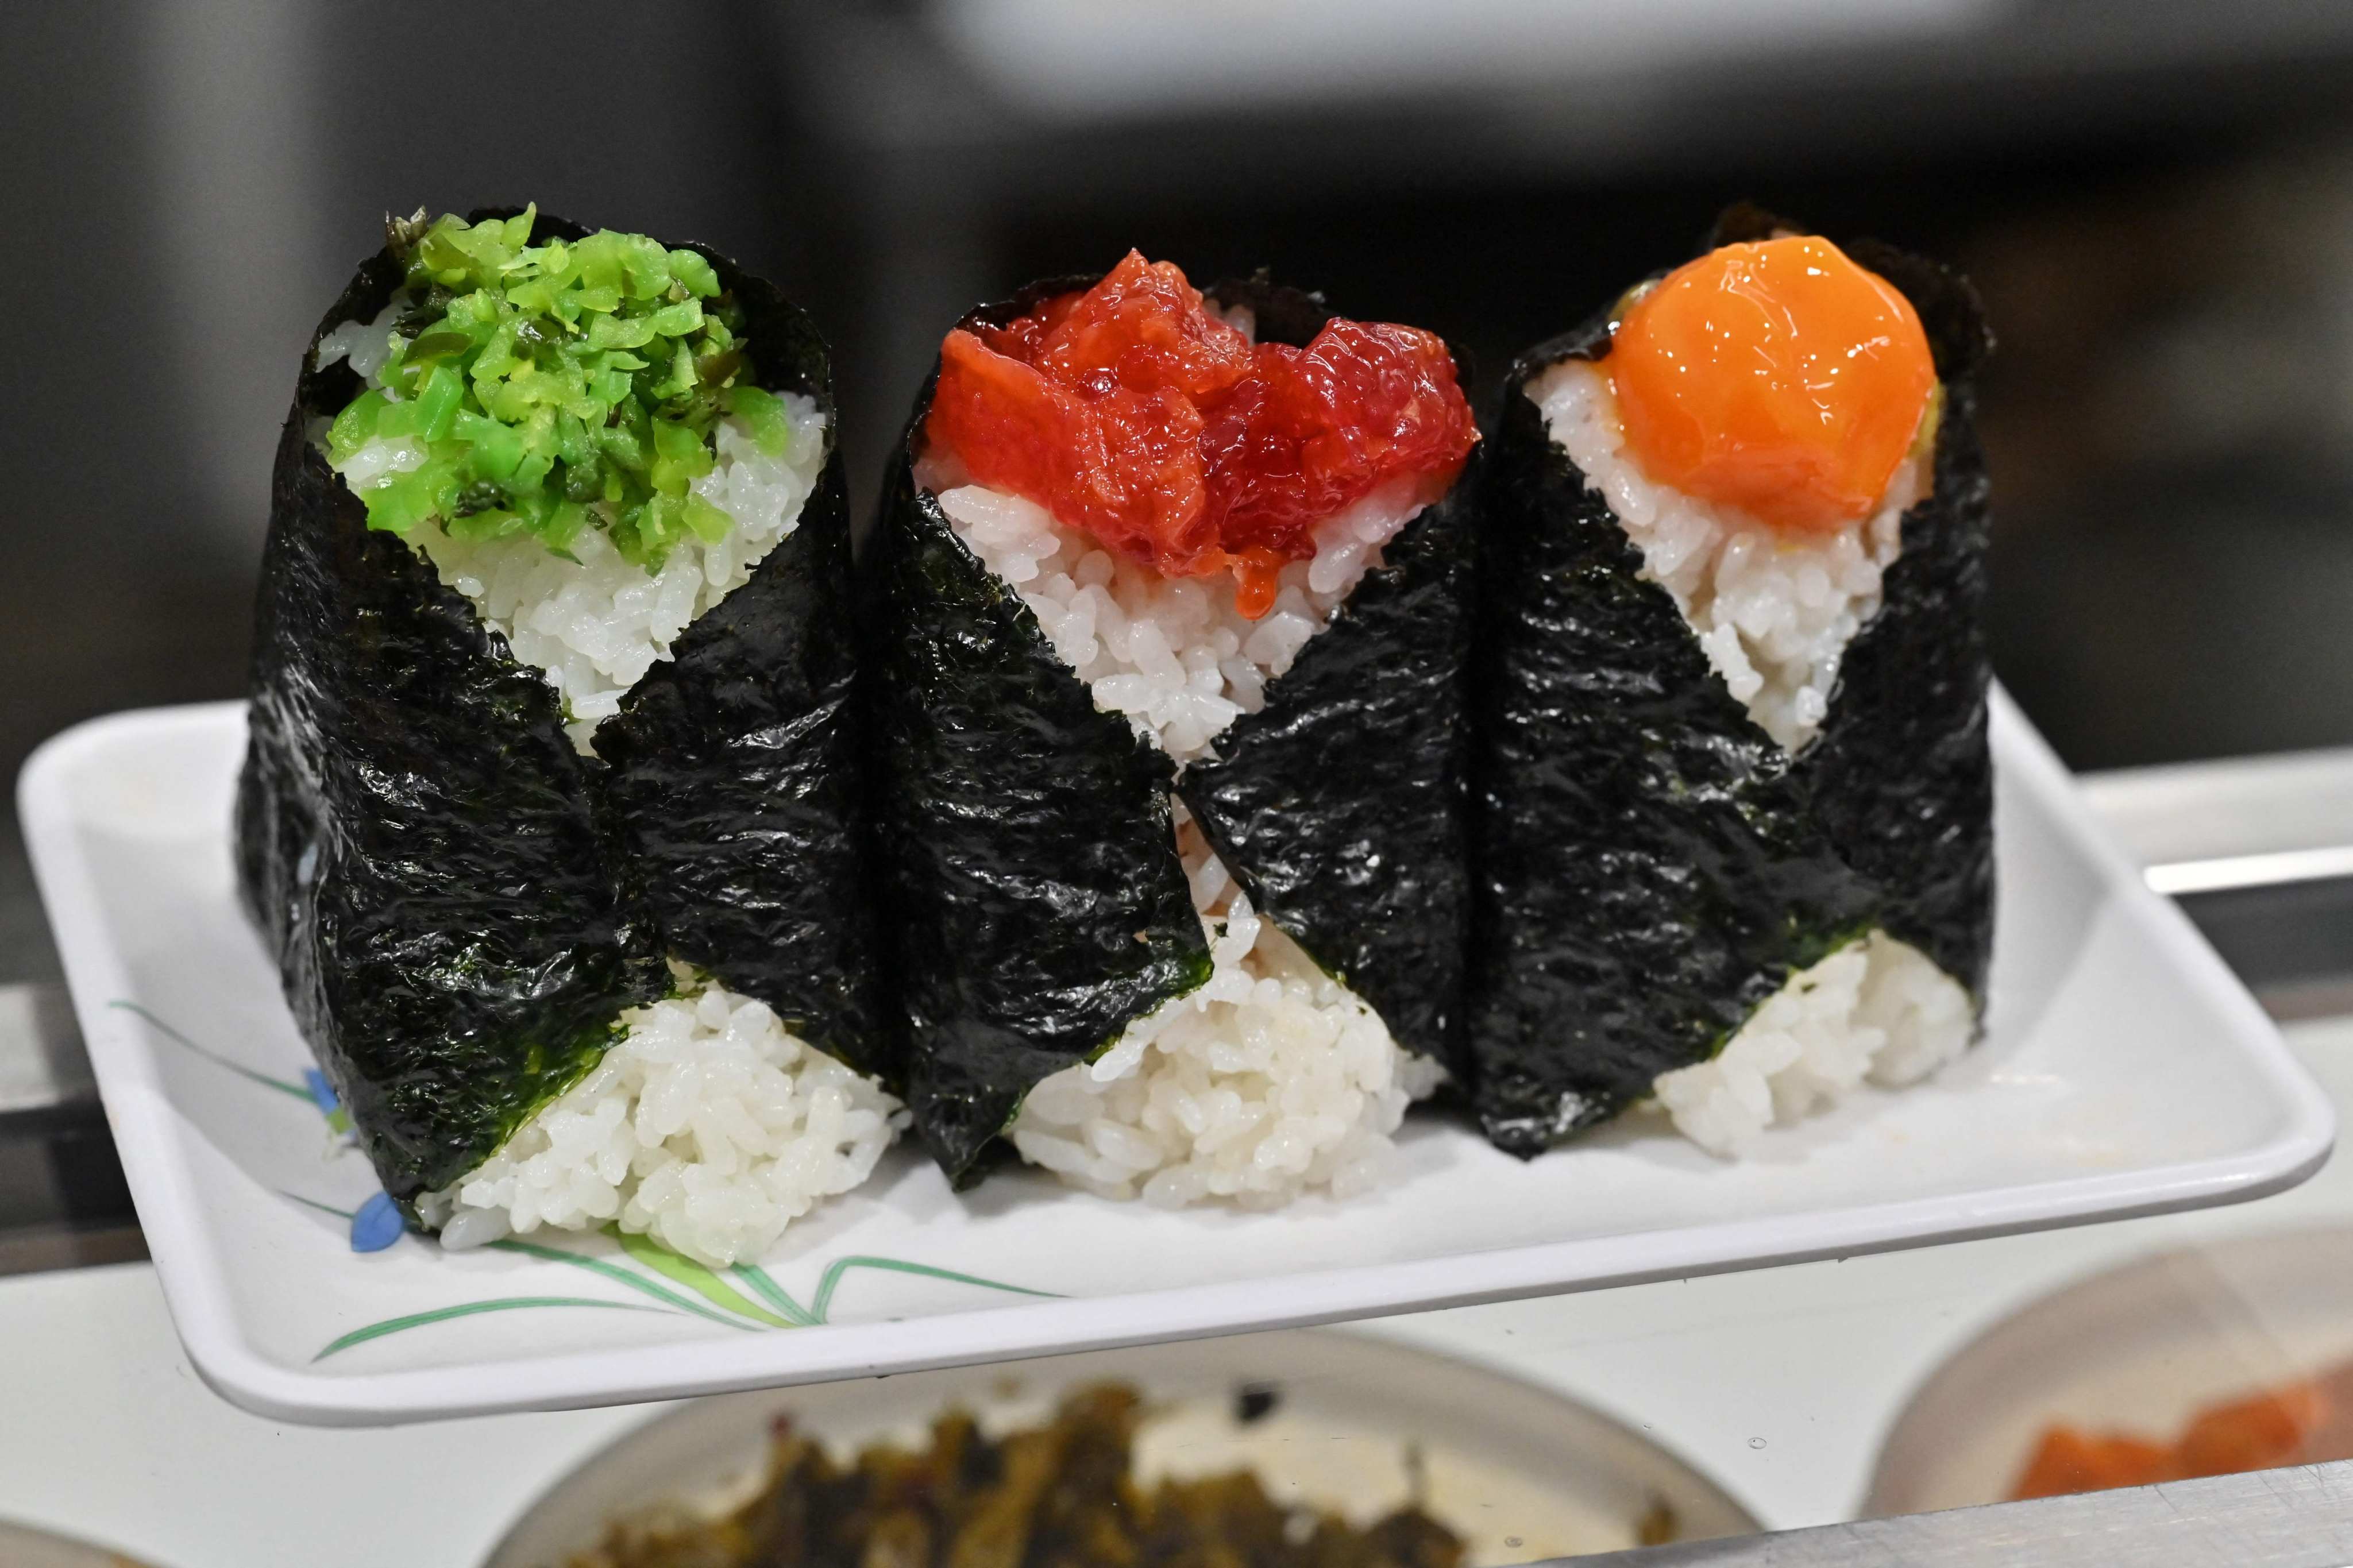 Wrapped in seaweed and stuffed with delicious fillings, onigiri rice balls are shaking off their reputation as a cheap and uninspiring snack in Japan. Photo: AFP